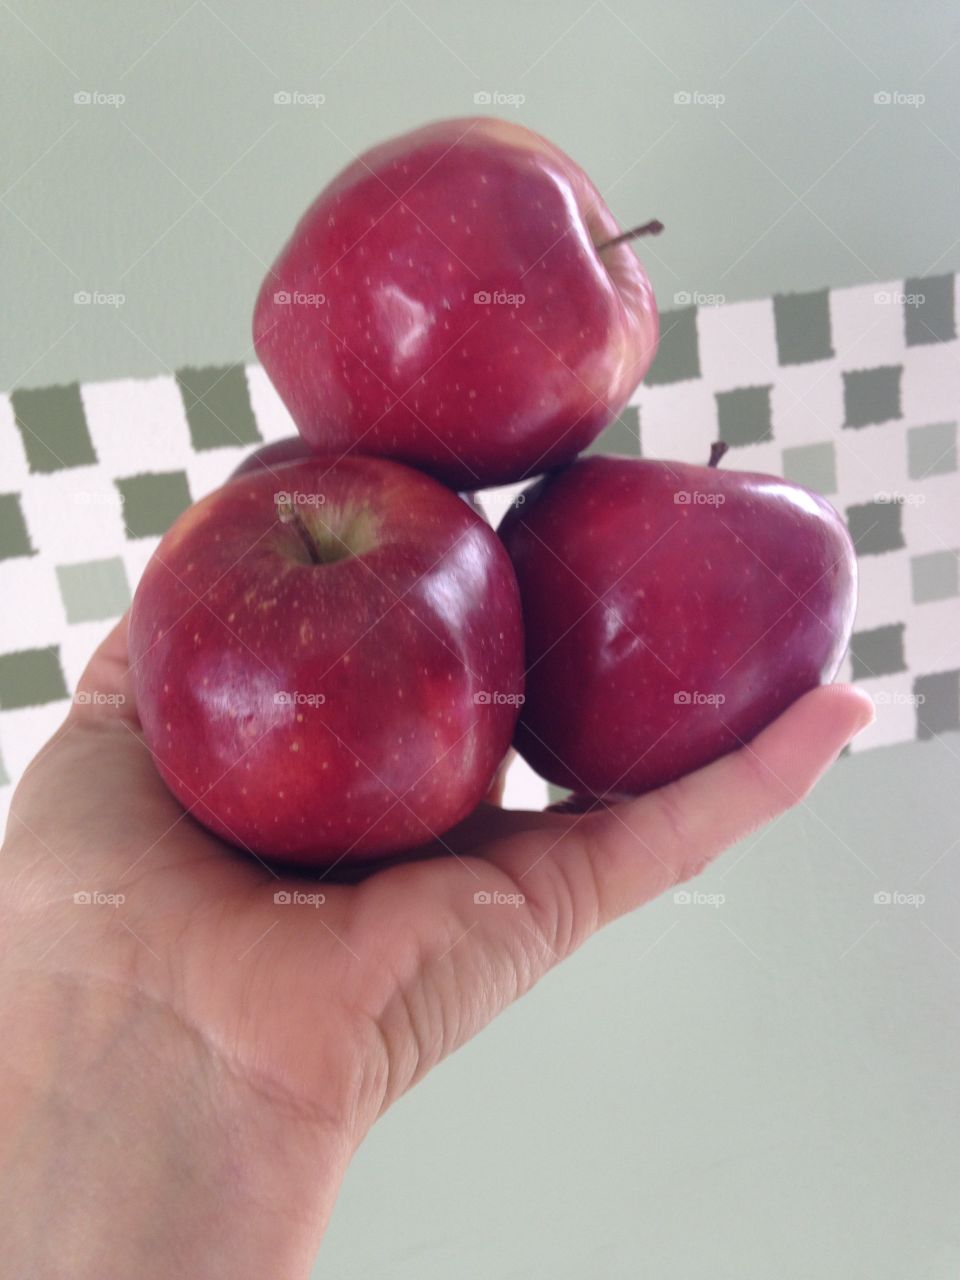 Holding red delicious apples 